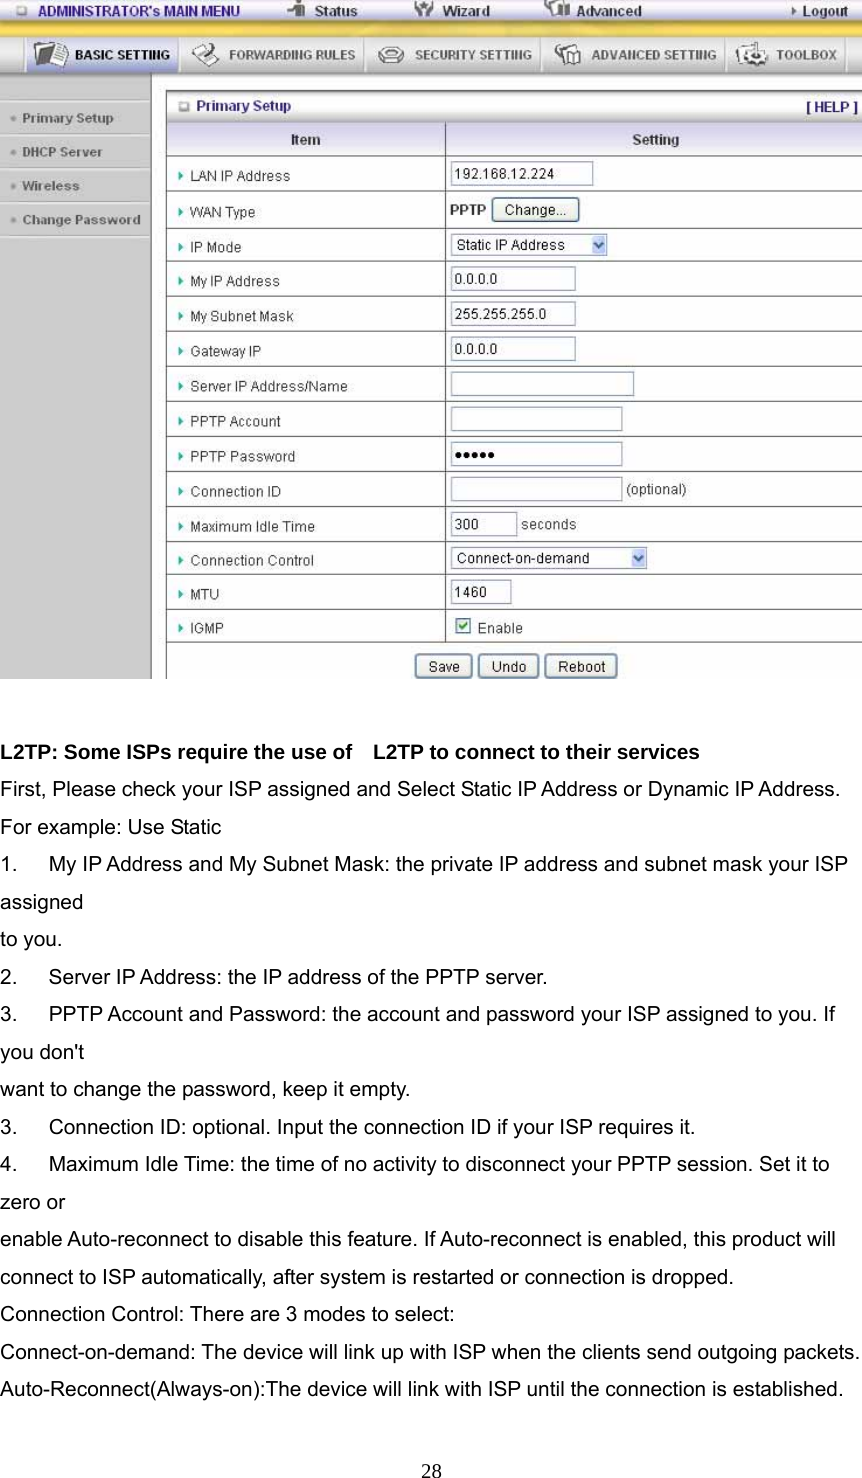  28  L2TP: Some ISPs require the use of    L2TP to connect to their services First, Please check your ISP assigned and Select Static IP Address or Dynamic IP Address. For example: Use Static 1.      My IP Address and My Subnet Mask: the private IP address and subnet mask your ISP assigned  to you.   2.    Server IP Address: the IP address of the PPTP server.   3.   PPTP Account and Password: the account and password your ISP assigned to you. If you don&apos;t want to change the password, keep it empty.   3.      Connection ID: optional. Input the connection ID if your ISP requires it.   4.      Maximum Idle Time: the time of no activity to disconnect your PPTP session. Set it to zero or   enable Auto-reconnect to disable this feature. If Auto-reconnect is enabled, this product will   connect to ISP automatically, after system is restarted or connection is dropped. Connection Control: There are 3 modes to select: Connect-on-demand: The device will link up with ISP when the clients send outgoing packets. Auto-Reconnect(Always-on):The device will link with ISP until the connection is established. 